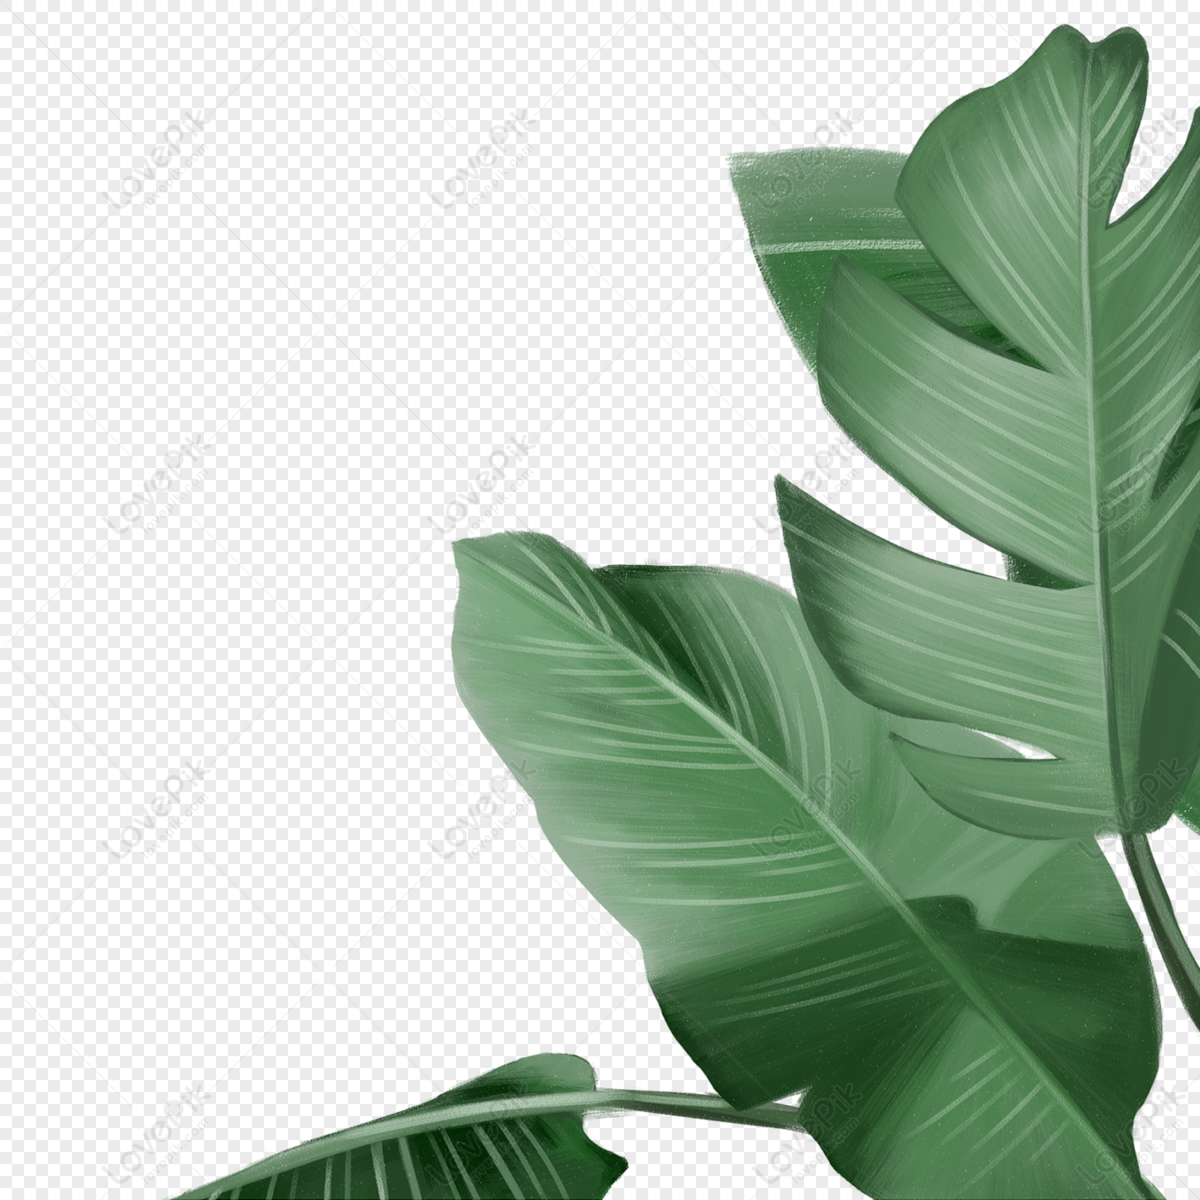 Tropical leaves, branches and leaves, hand painting, leaves png transparent background